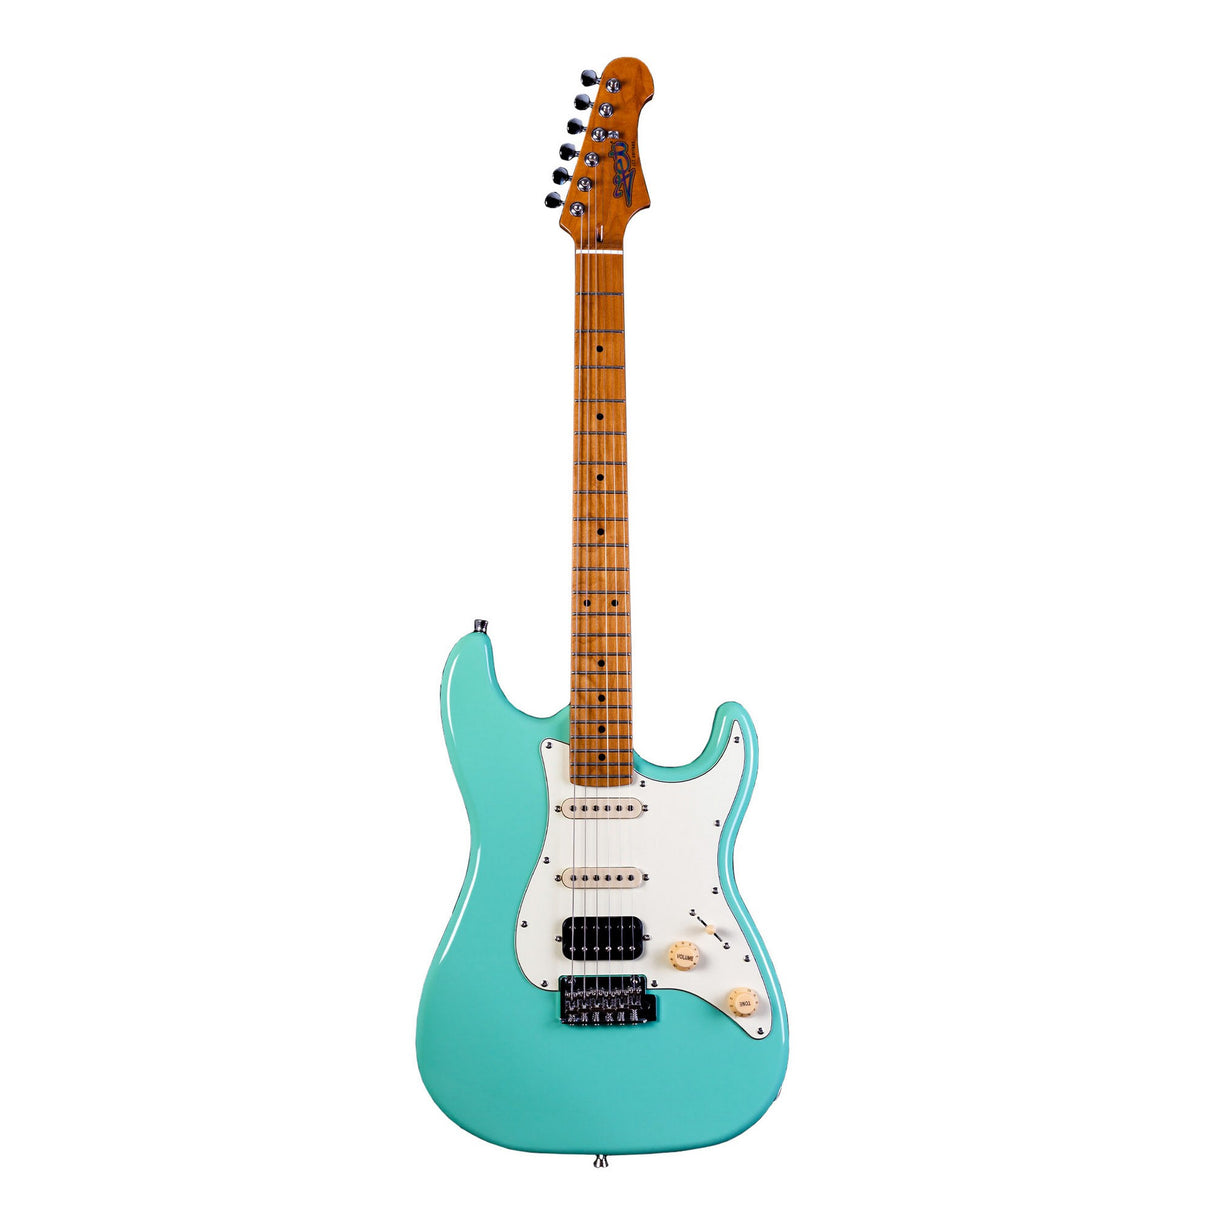 Jet Guitars JS-400 SFG HSS Basswood Body Electric Guitar with Roasted Maple Neck, Seafoam Green